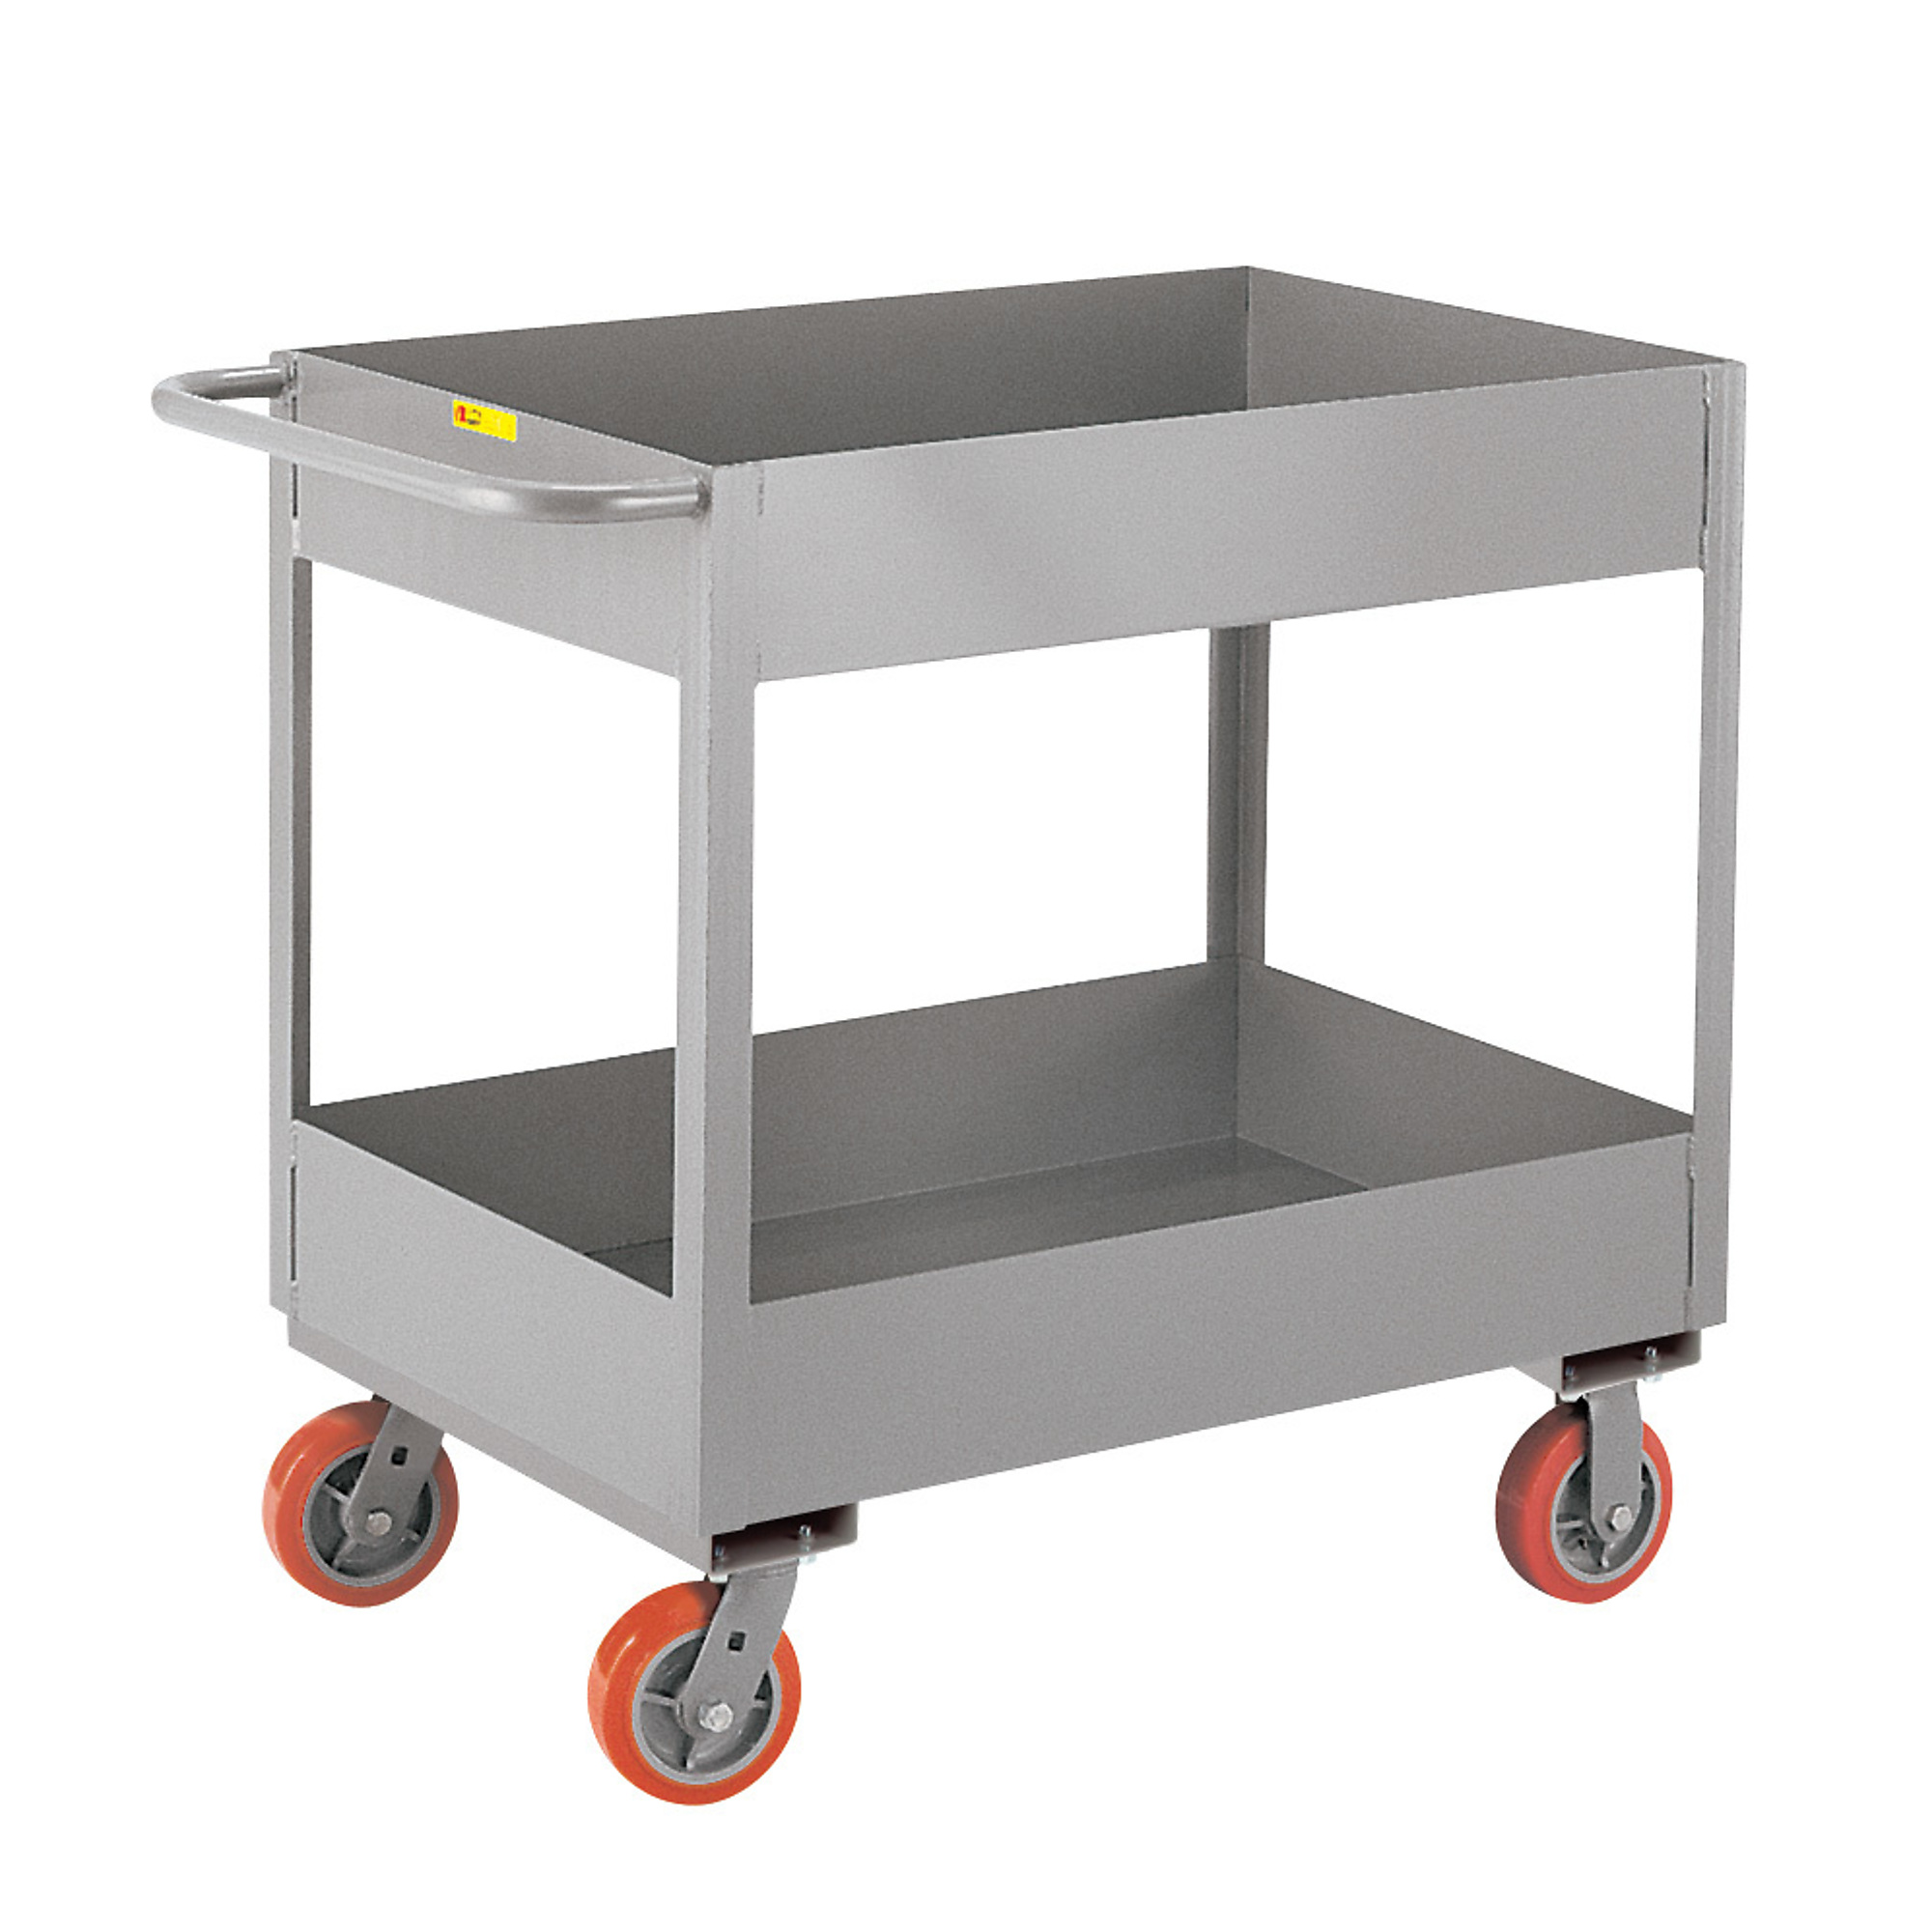 Little Giant, 6Inch Deep Shelf Truck, 18x30, 3600 lbs, Total Capacity 3600 lb, Shelves (qty.) 2, Material Carbon Steel, Model DS1830X6-6PY